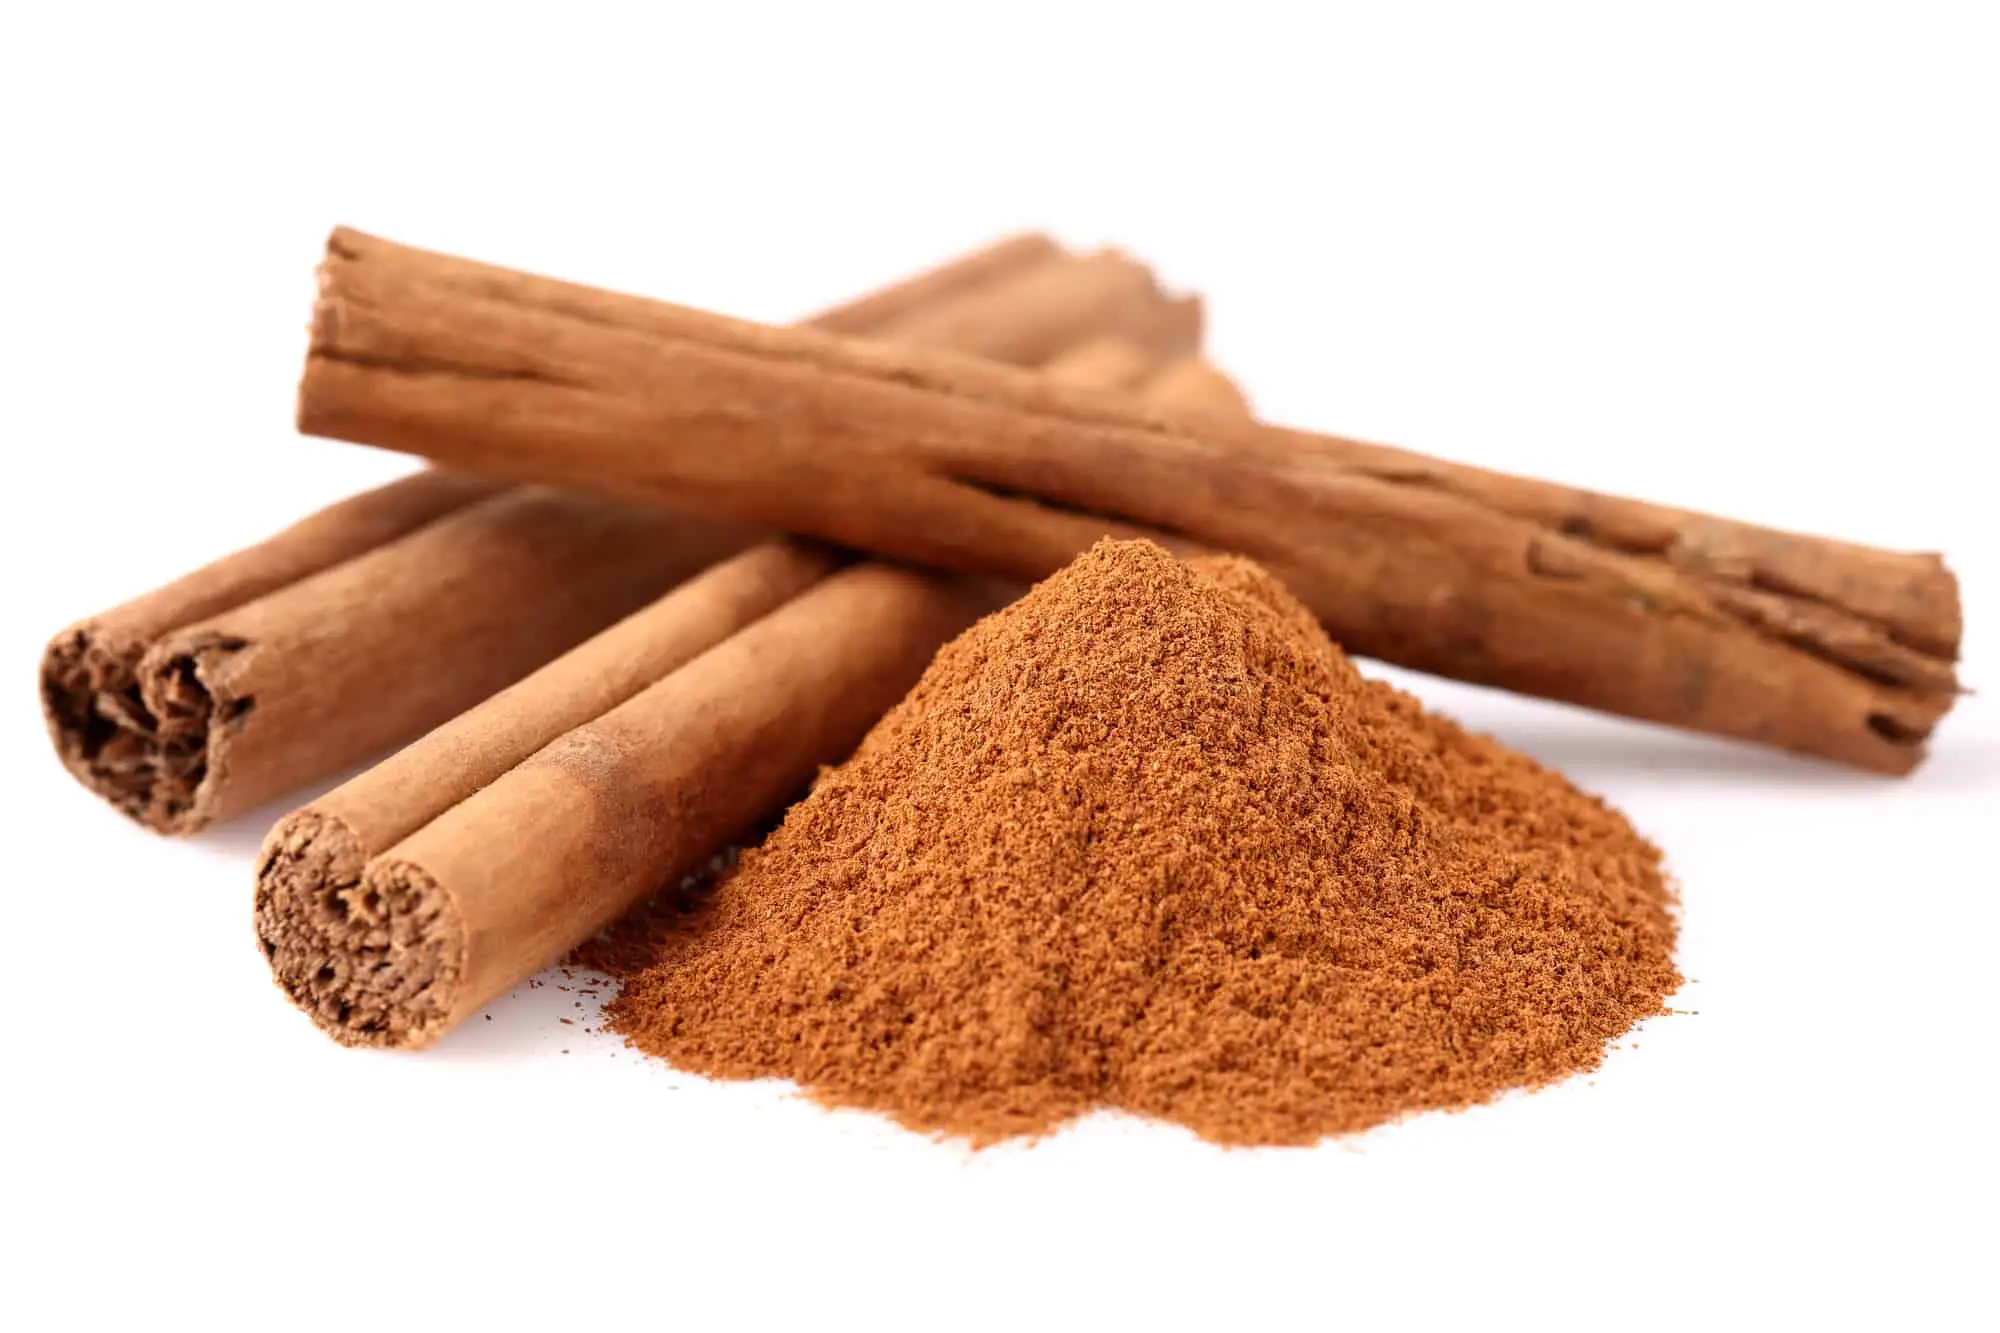 Cinnamon in closeup. Can Cinnamon cause a miscarriage?